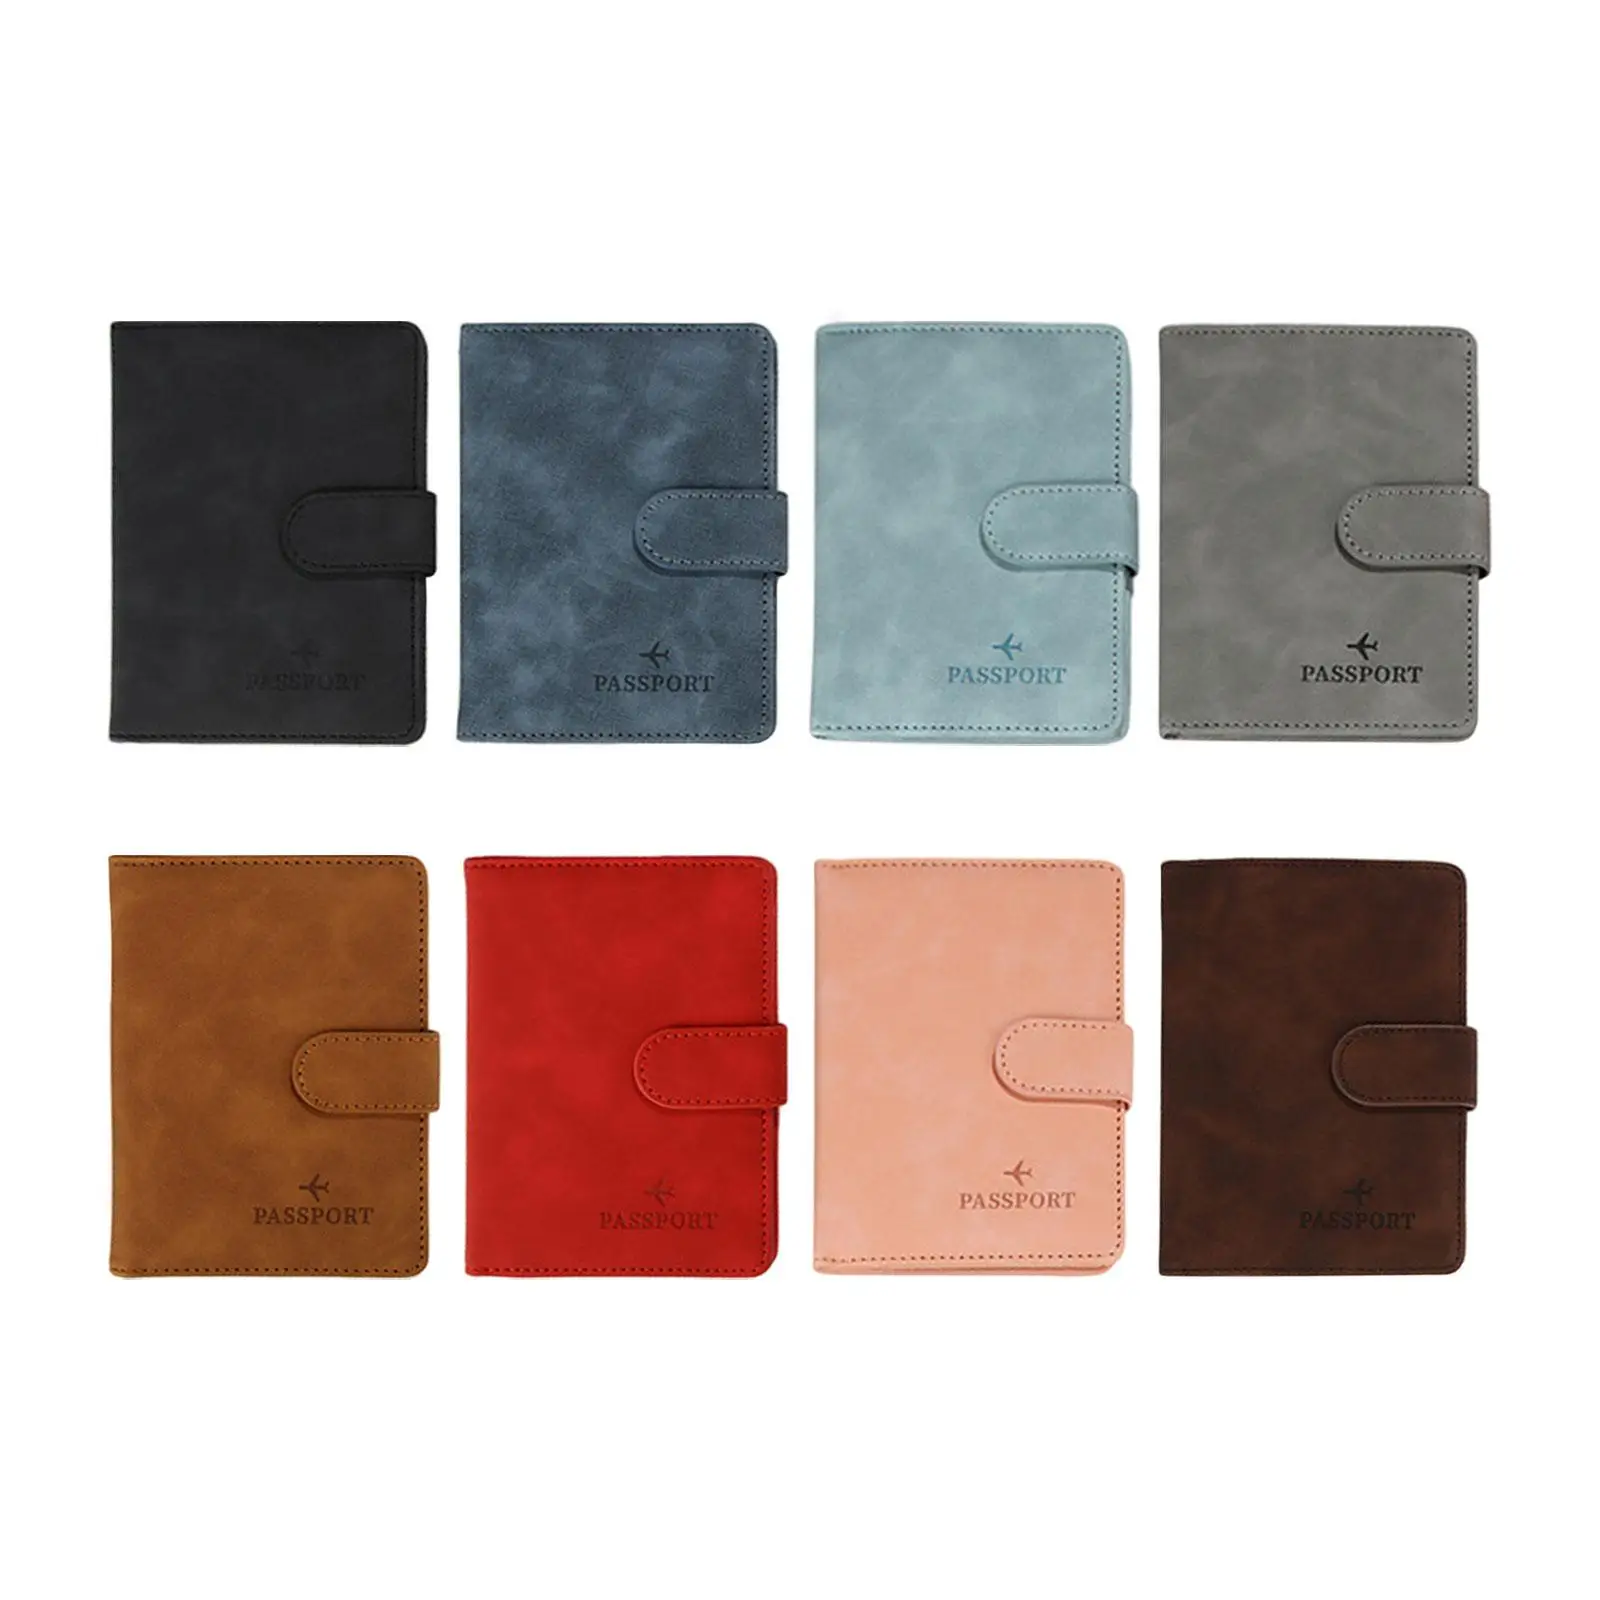 PU Leather Card Case Passport Cover Holder for Woman and Man Travel Family